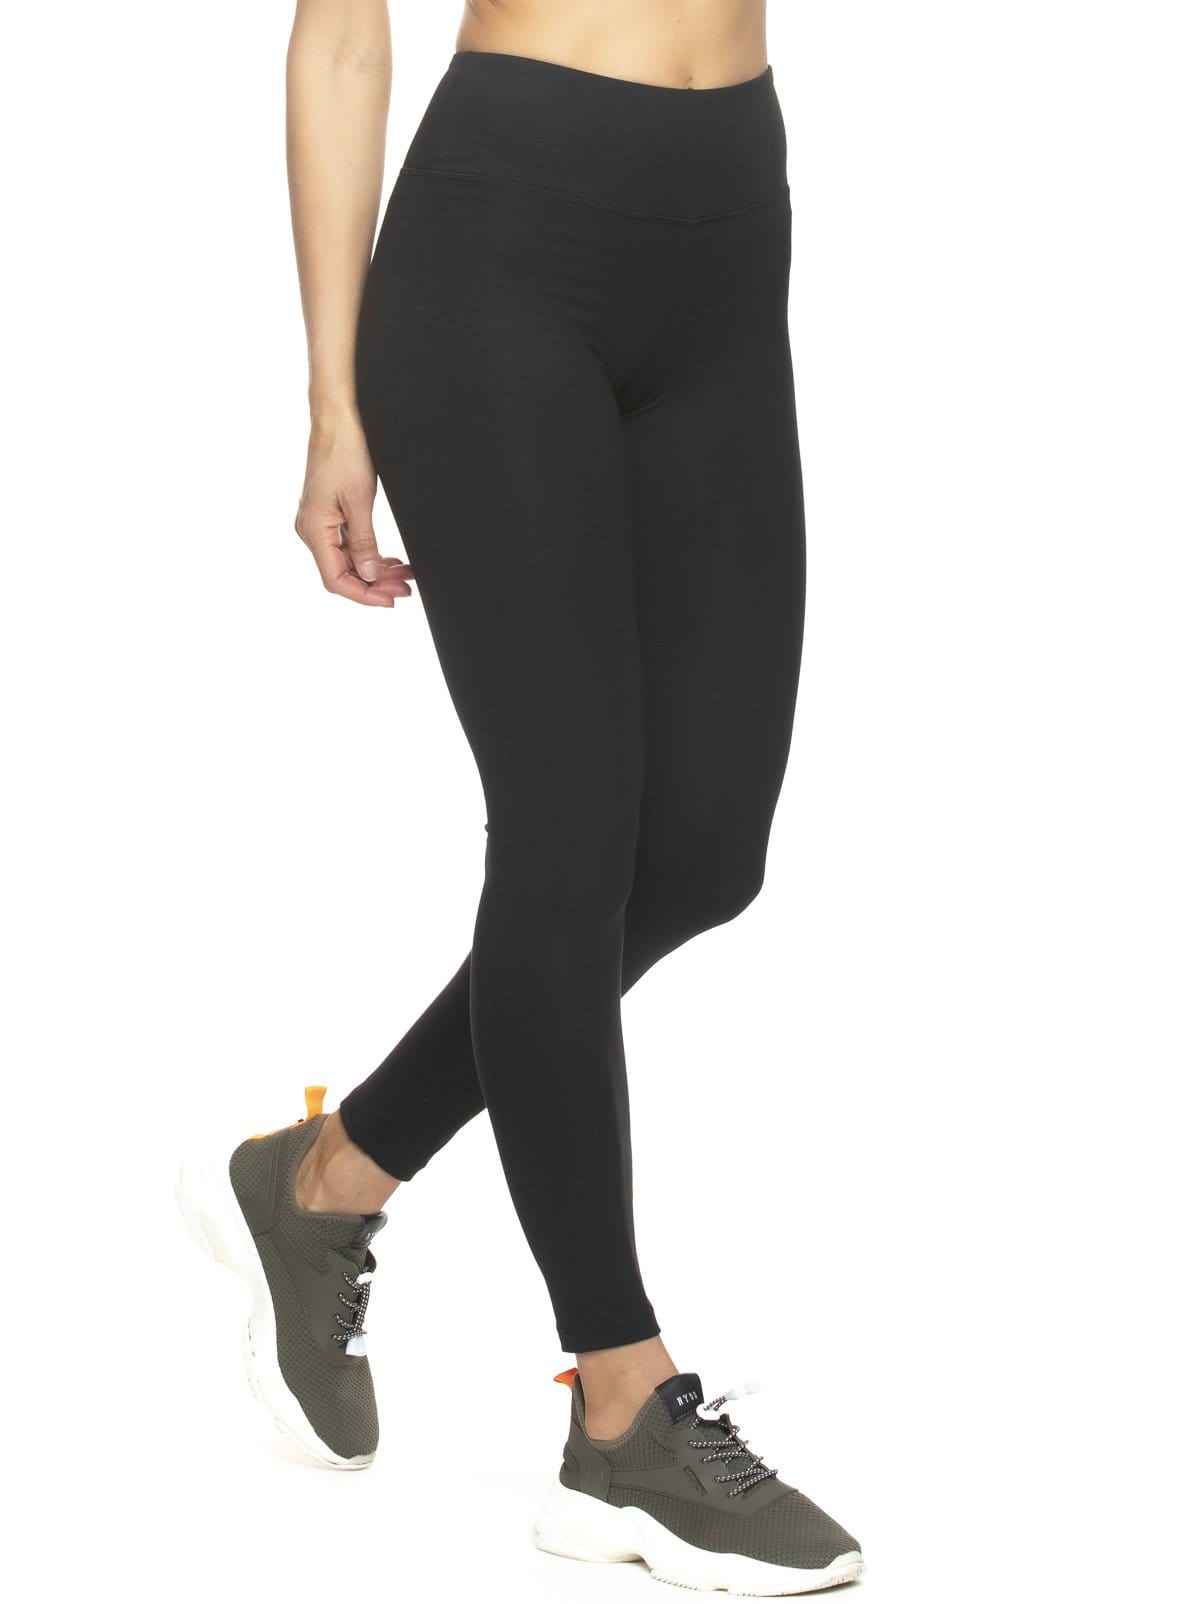 Lux2boutique.com - The Black High Waisted Snakeskin Leggings are